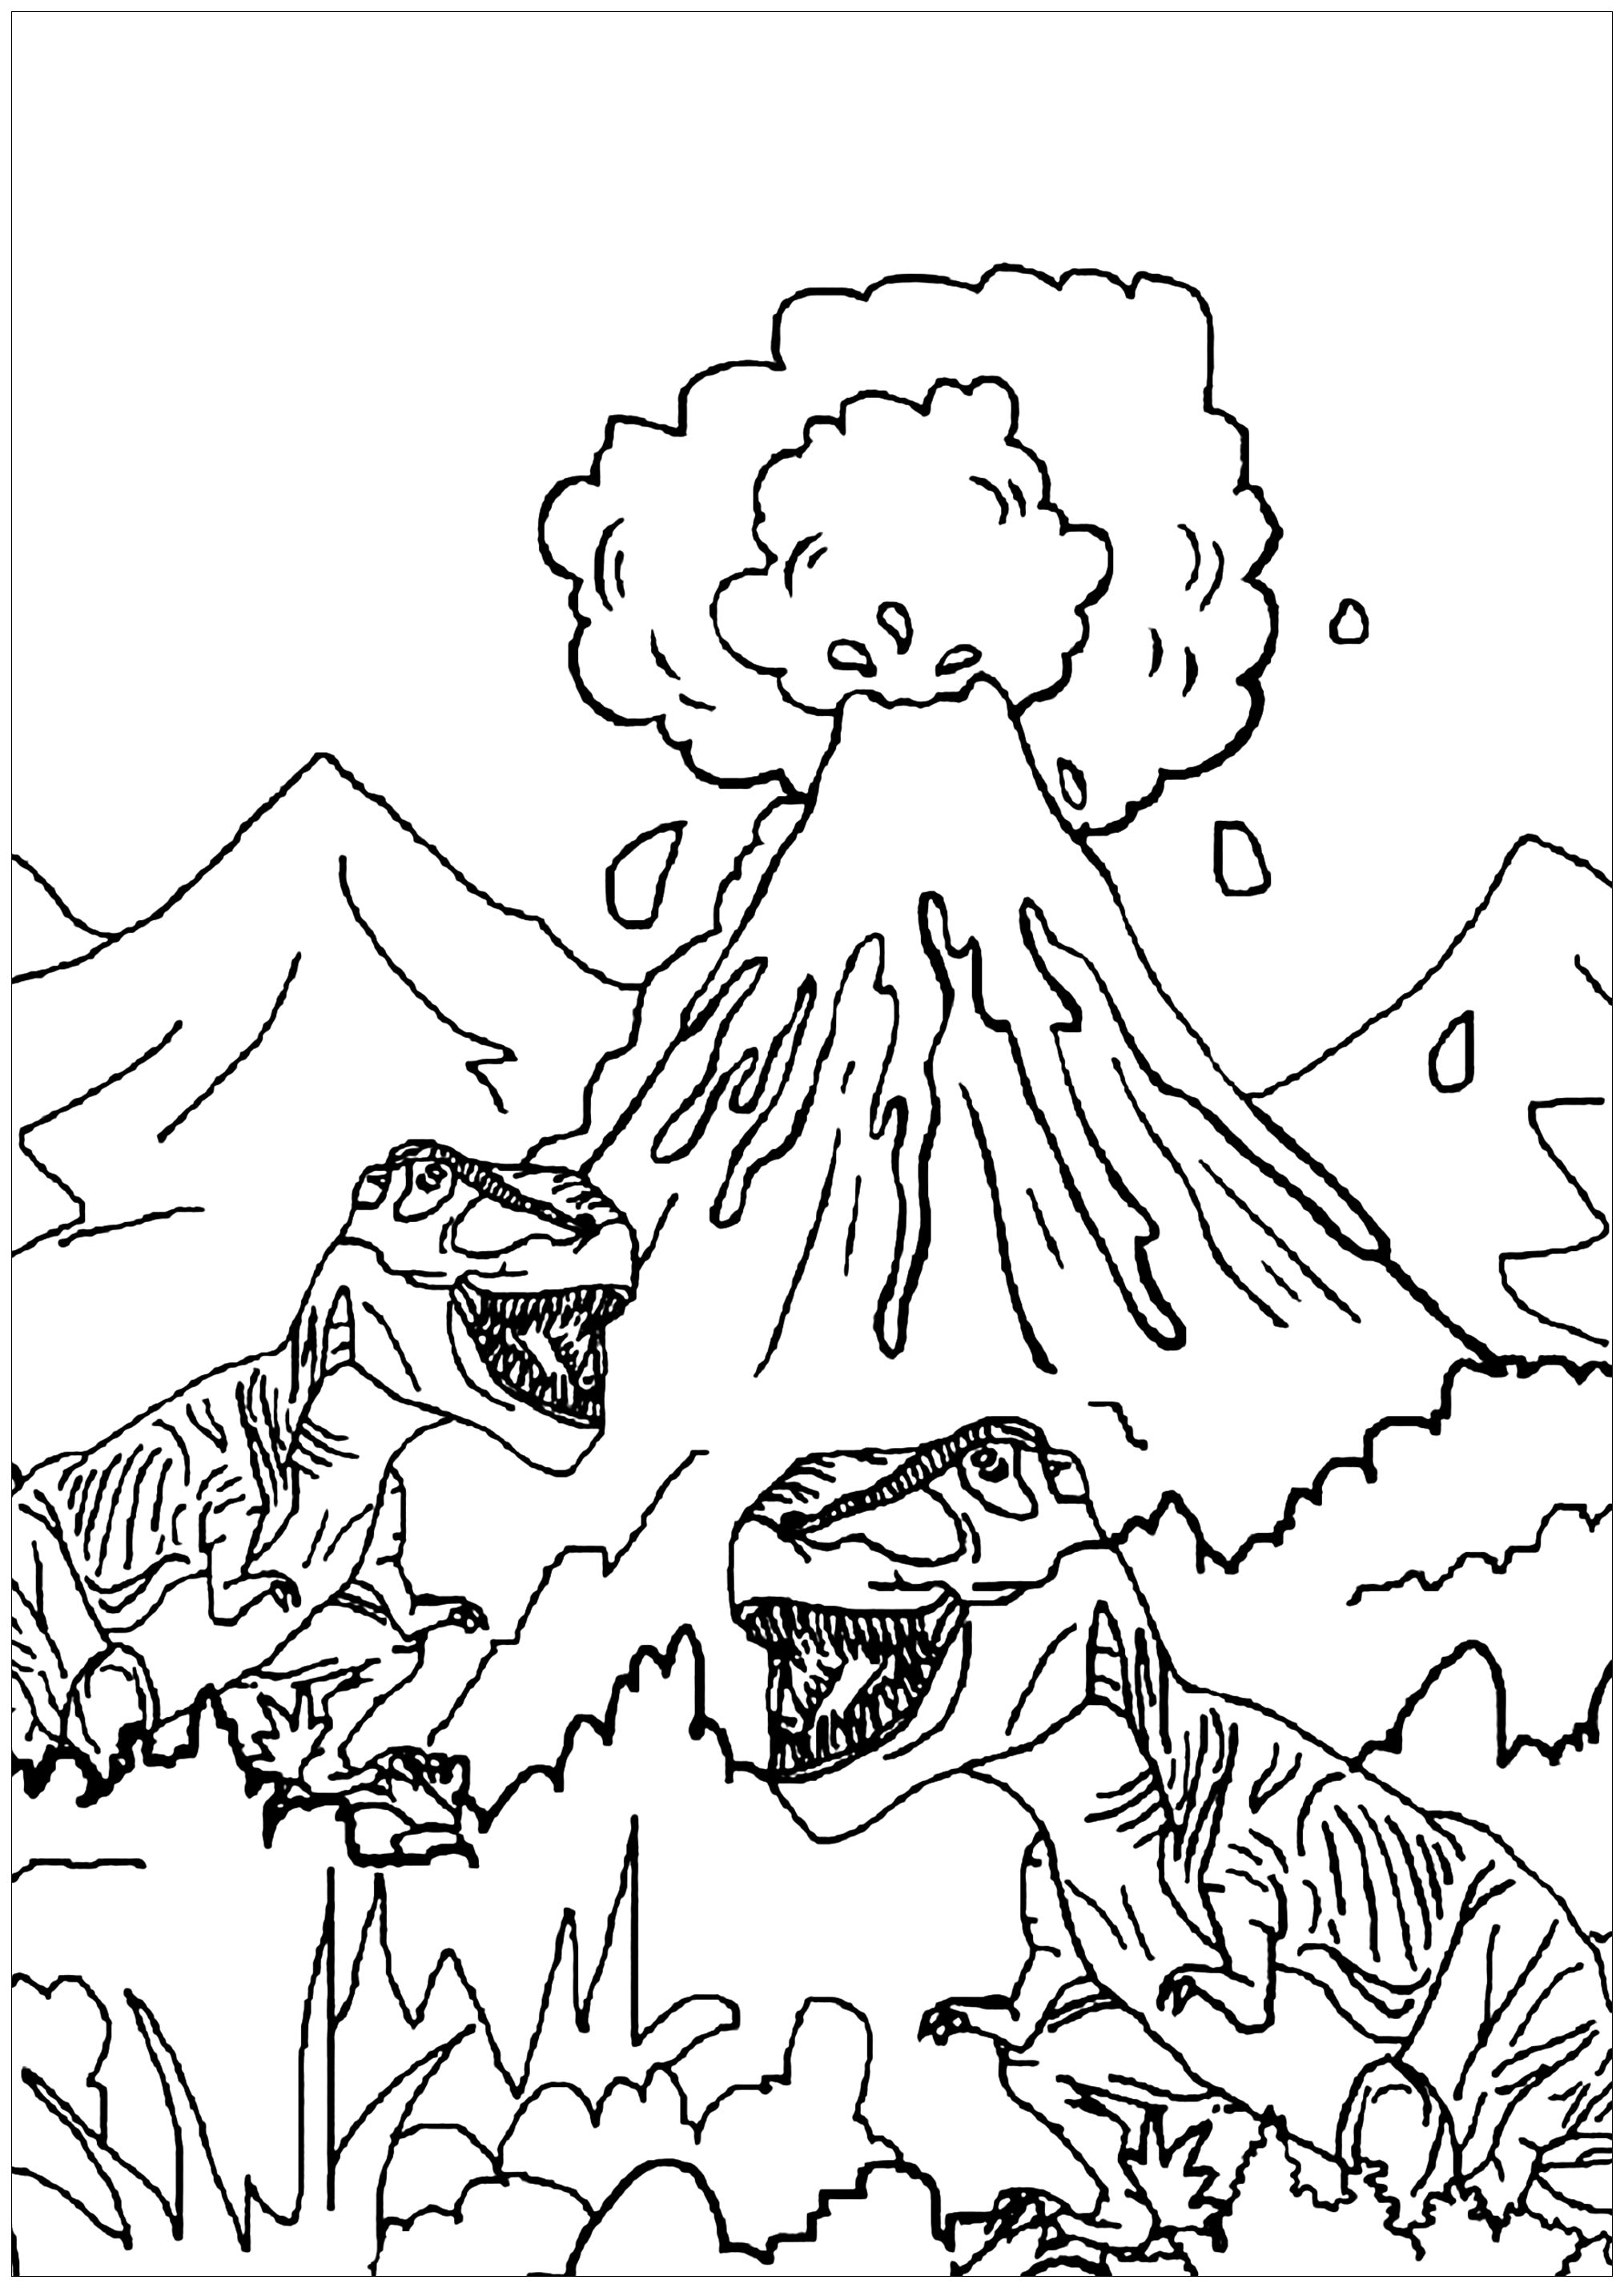 Download Dinosaurs To Print For Free Dinosaurs And Volcano Dinosaurs Kids Coloring Pages